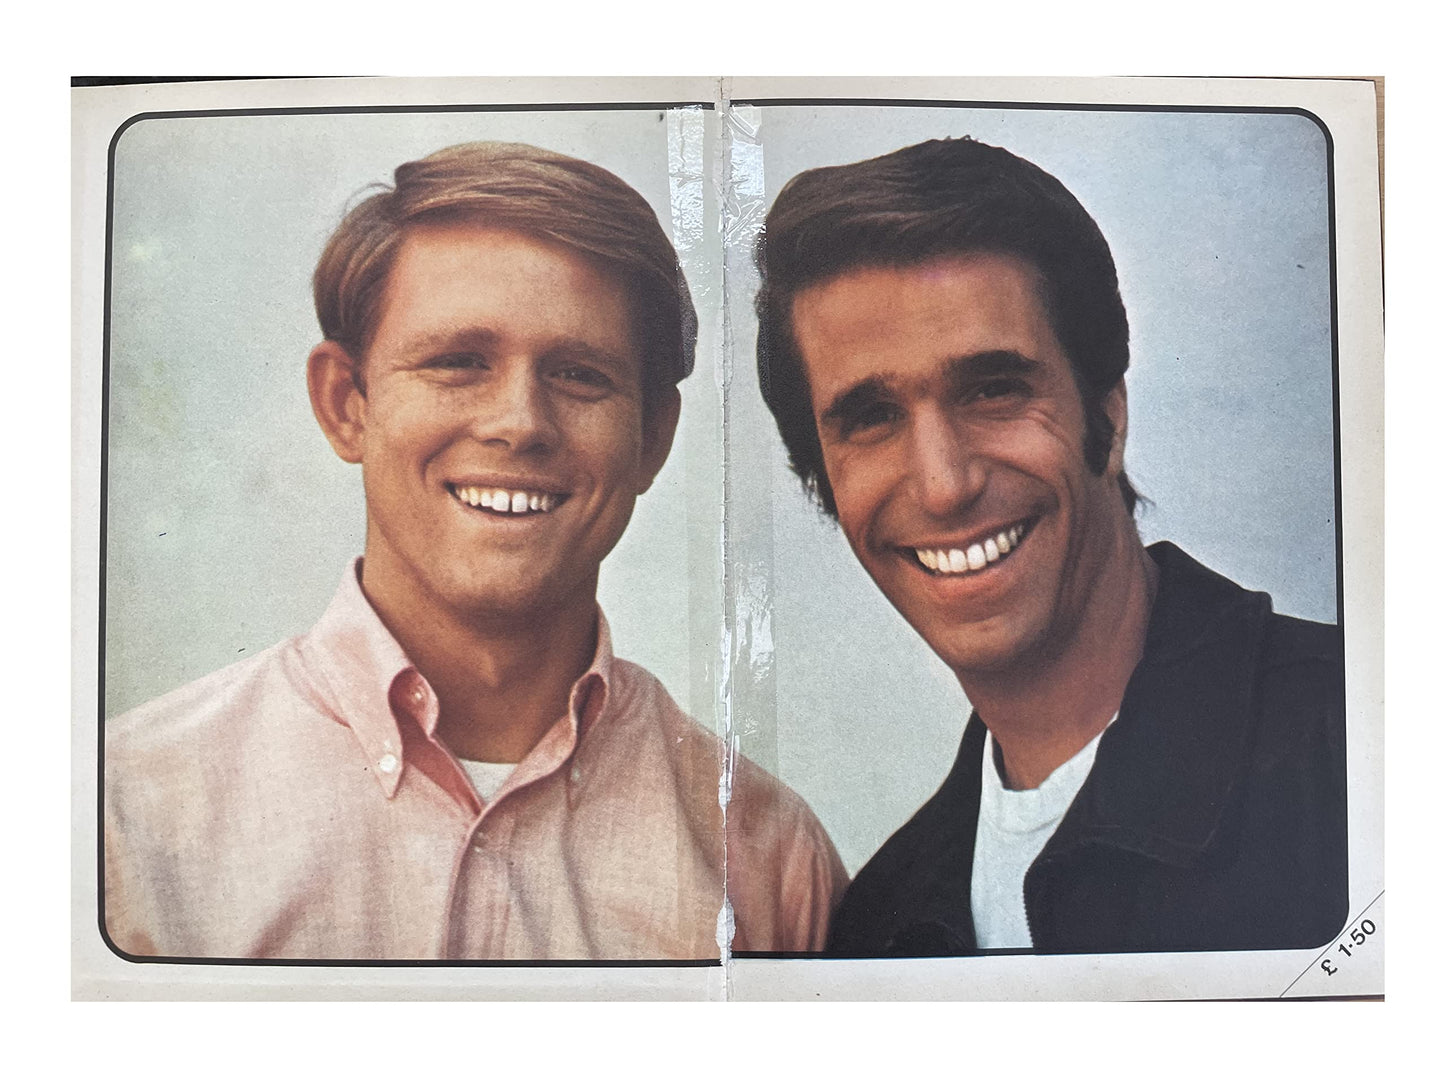 Vintage Happy Days Annual 1979 – Based On The Popular TV Series